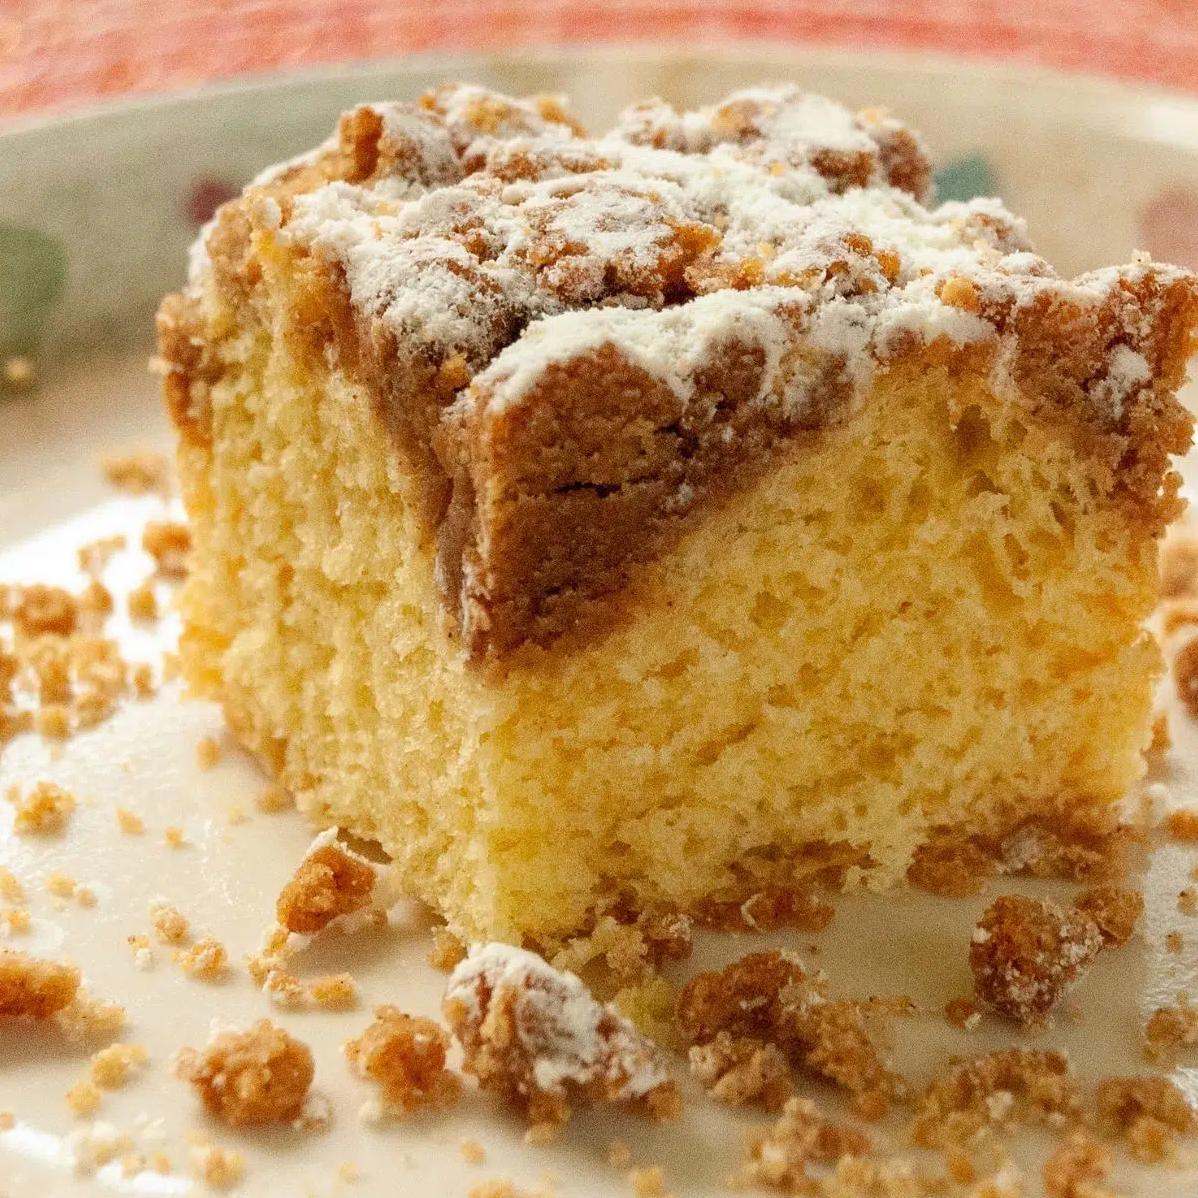  Start your morning off right with a slice of this classic coffee cake!